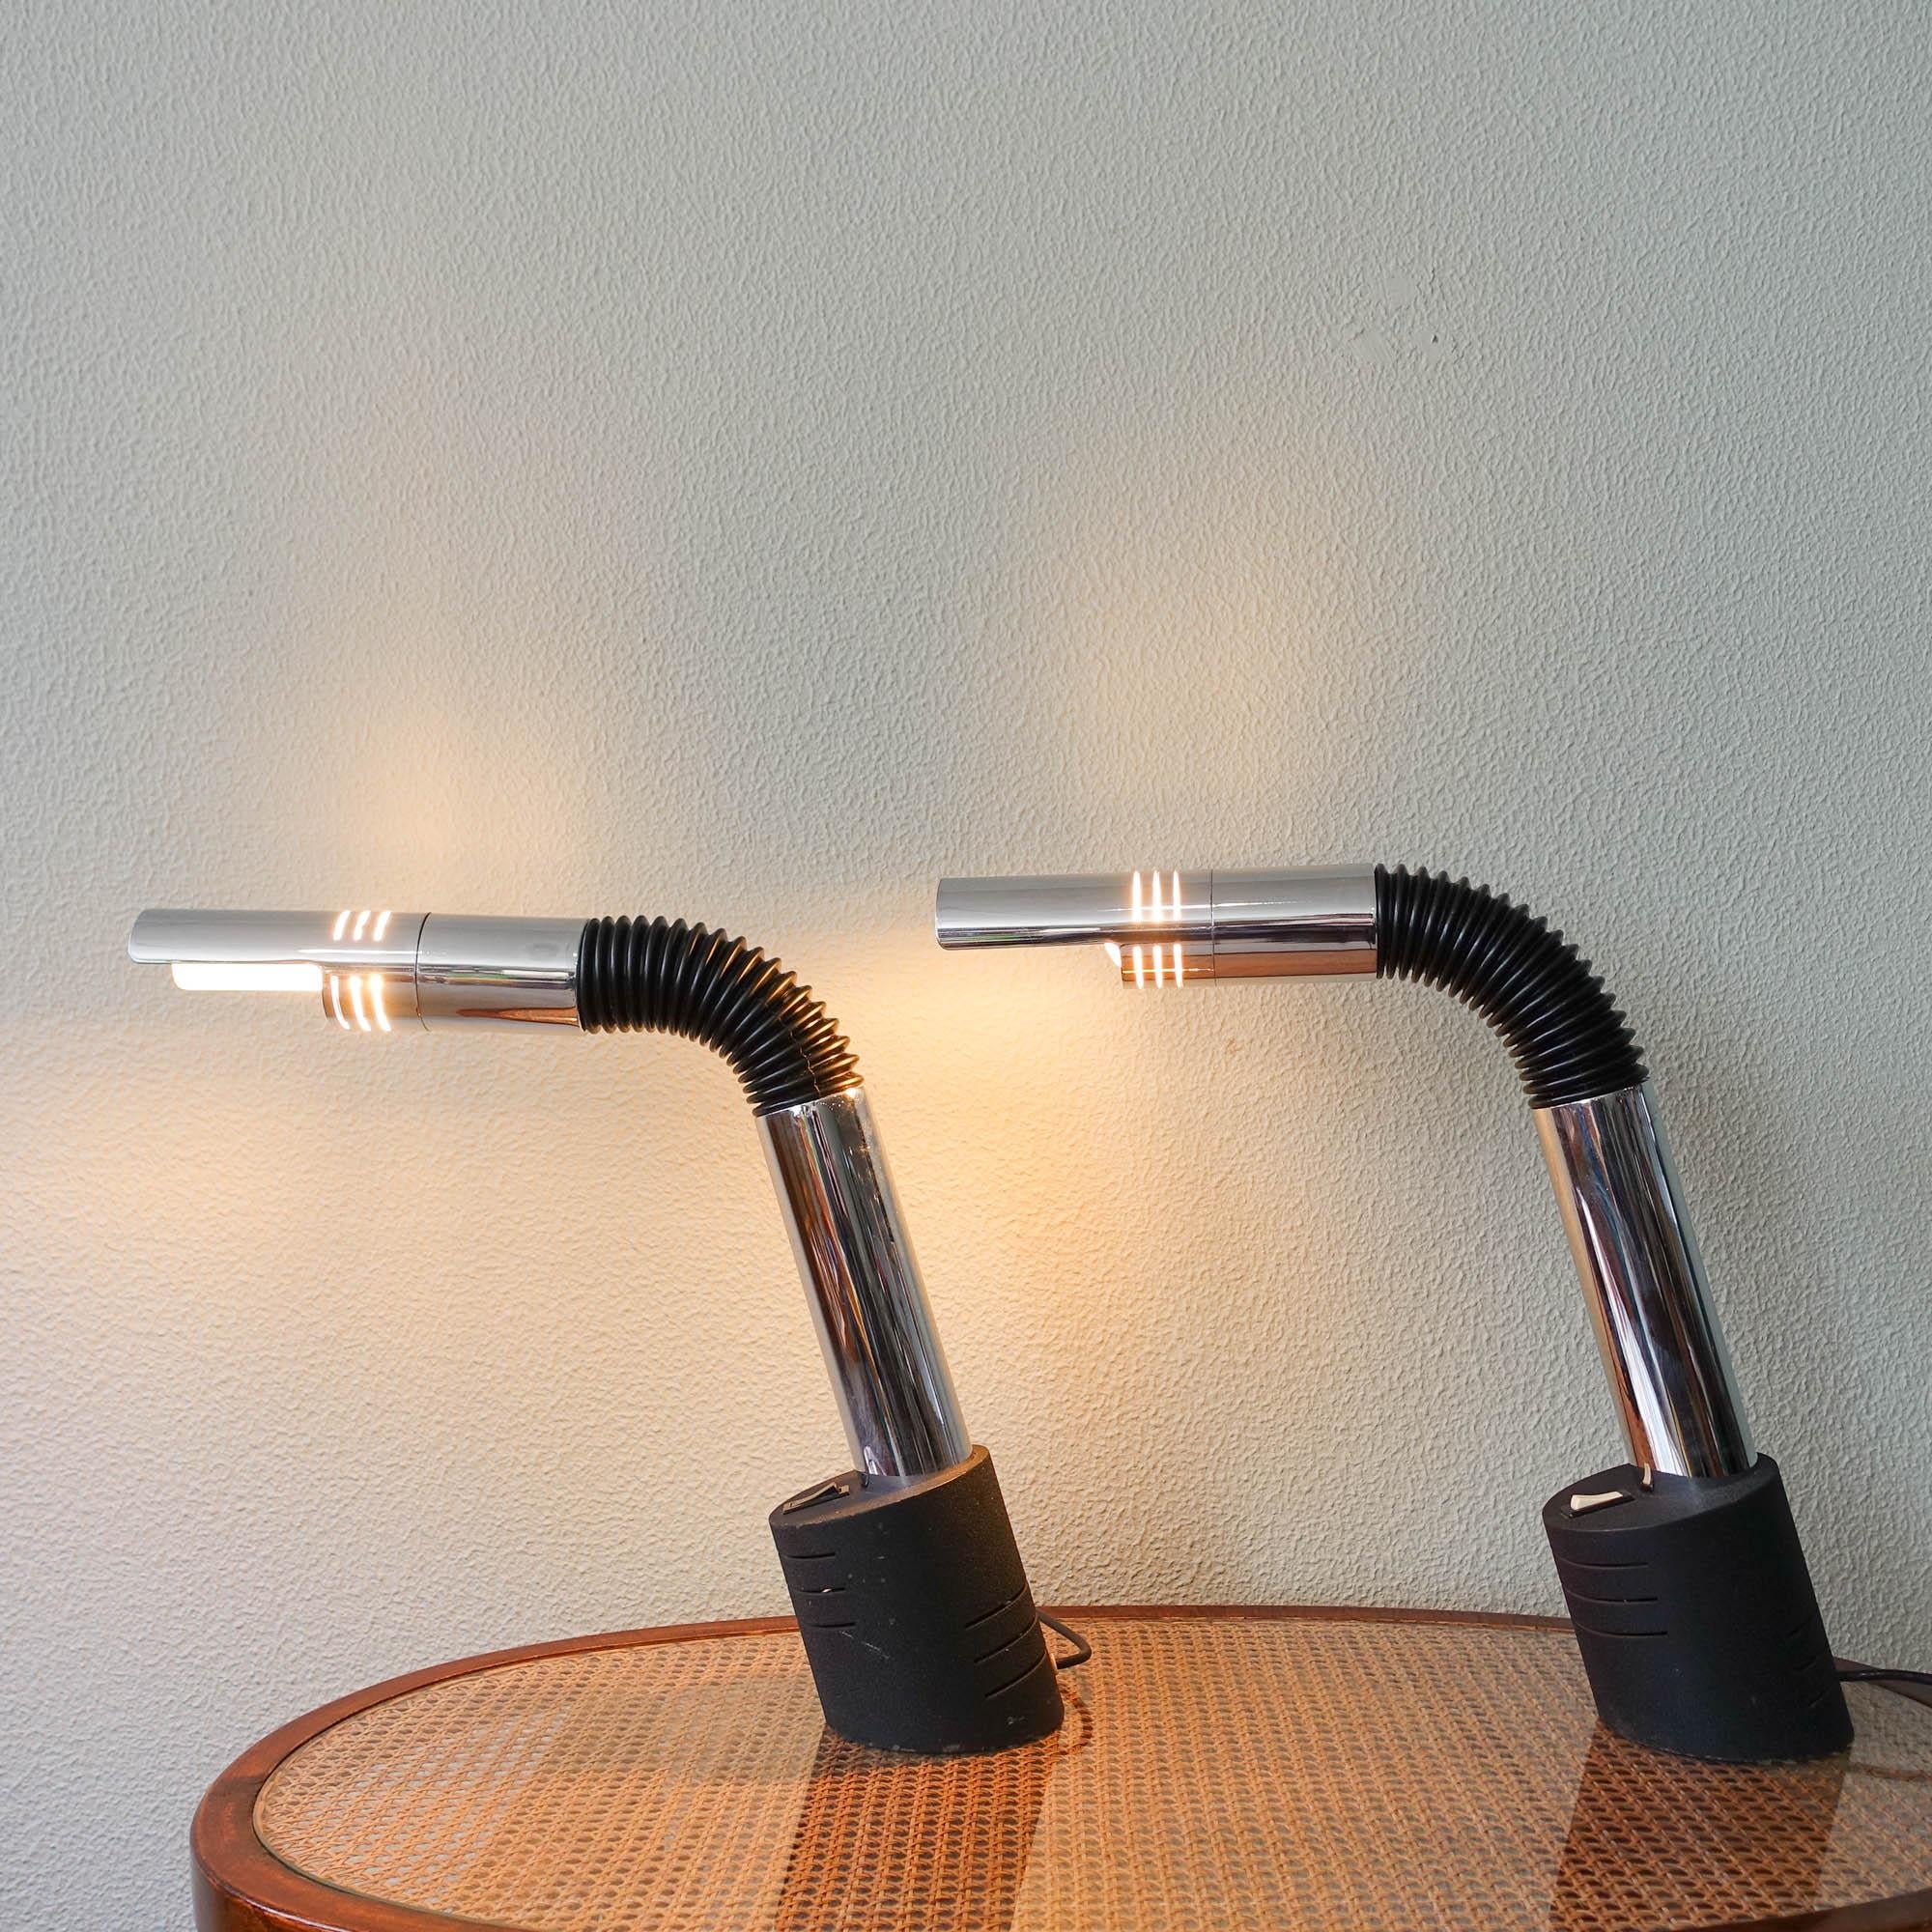 Mid-Century Modern Pair of “Elbow” Table Lamp by E. Bellini for Targetti Sankey, 1970s